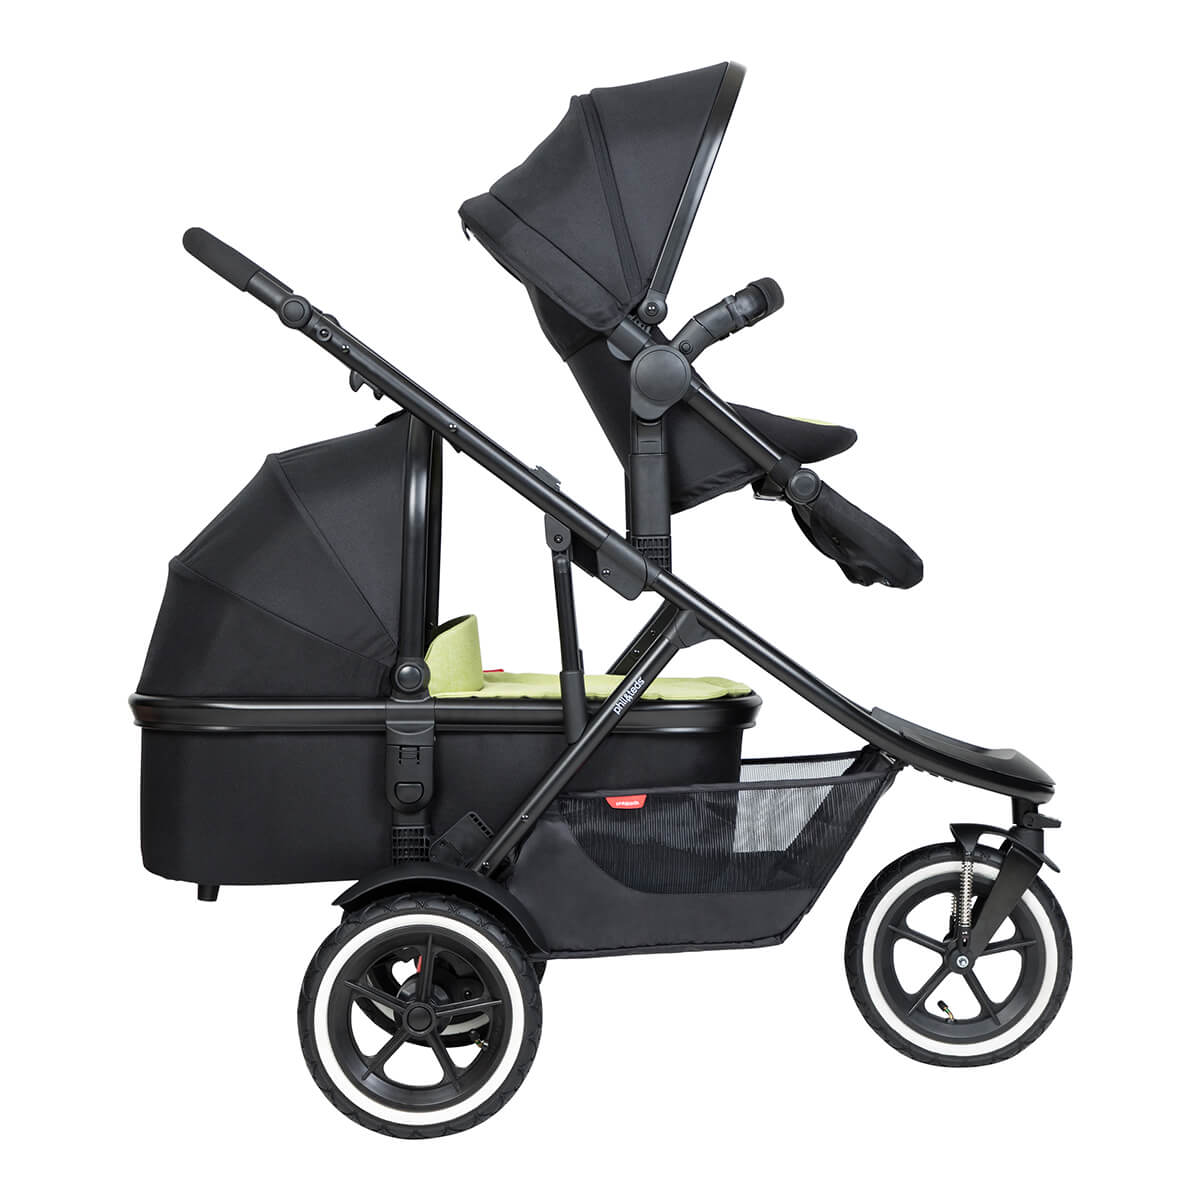 https://cdn.accentuate.io/7888305160362/19793939726506/philteds-sport-buggy-with-double-kit-extended-clip-and-snug-carrycot-side-view-v1700691760580.jpg?1200x1200